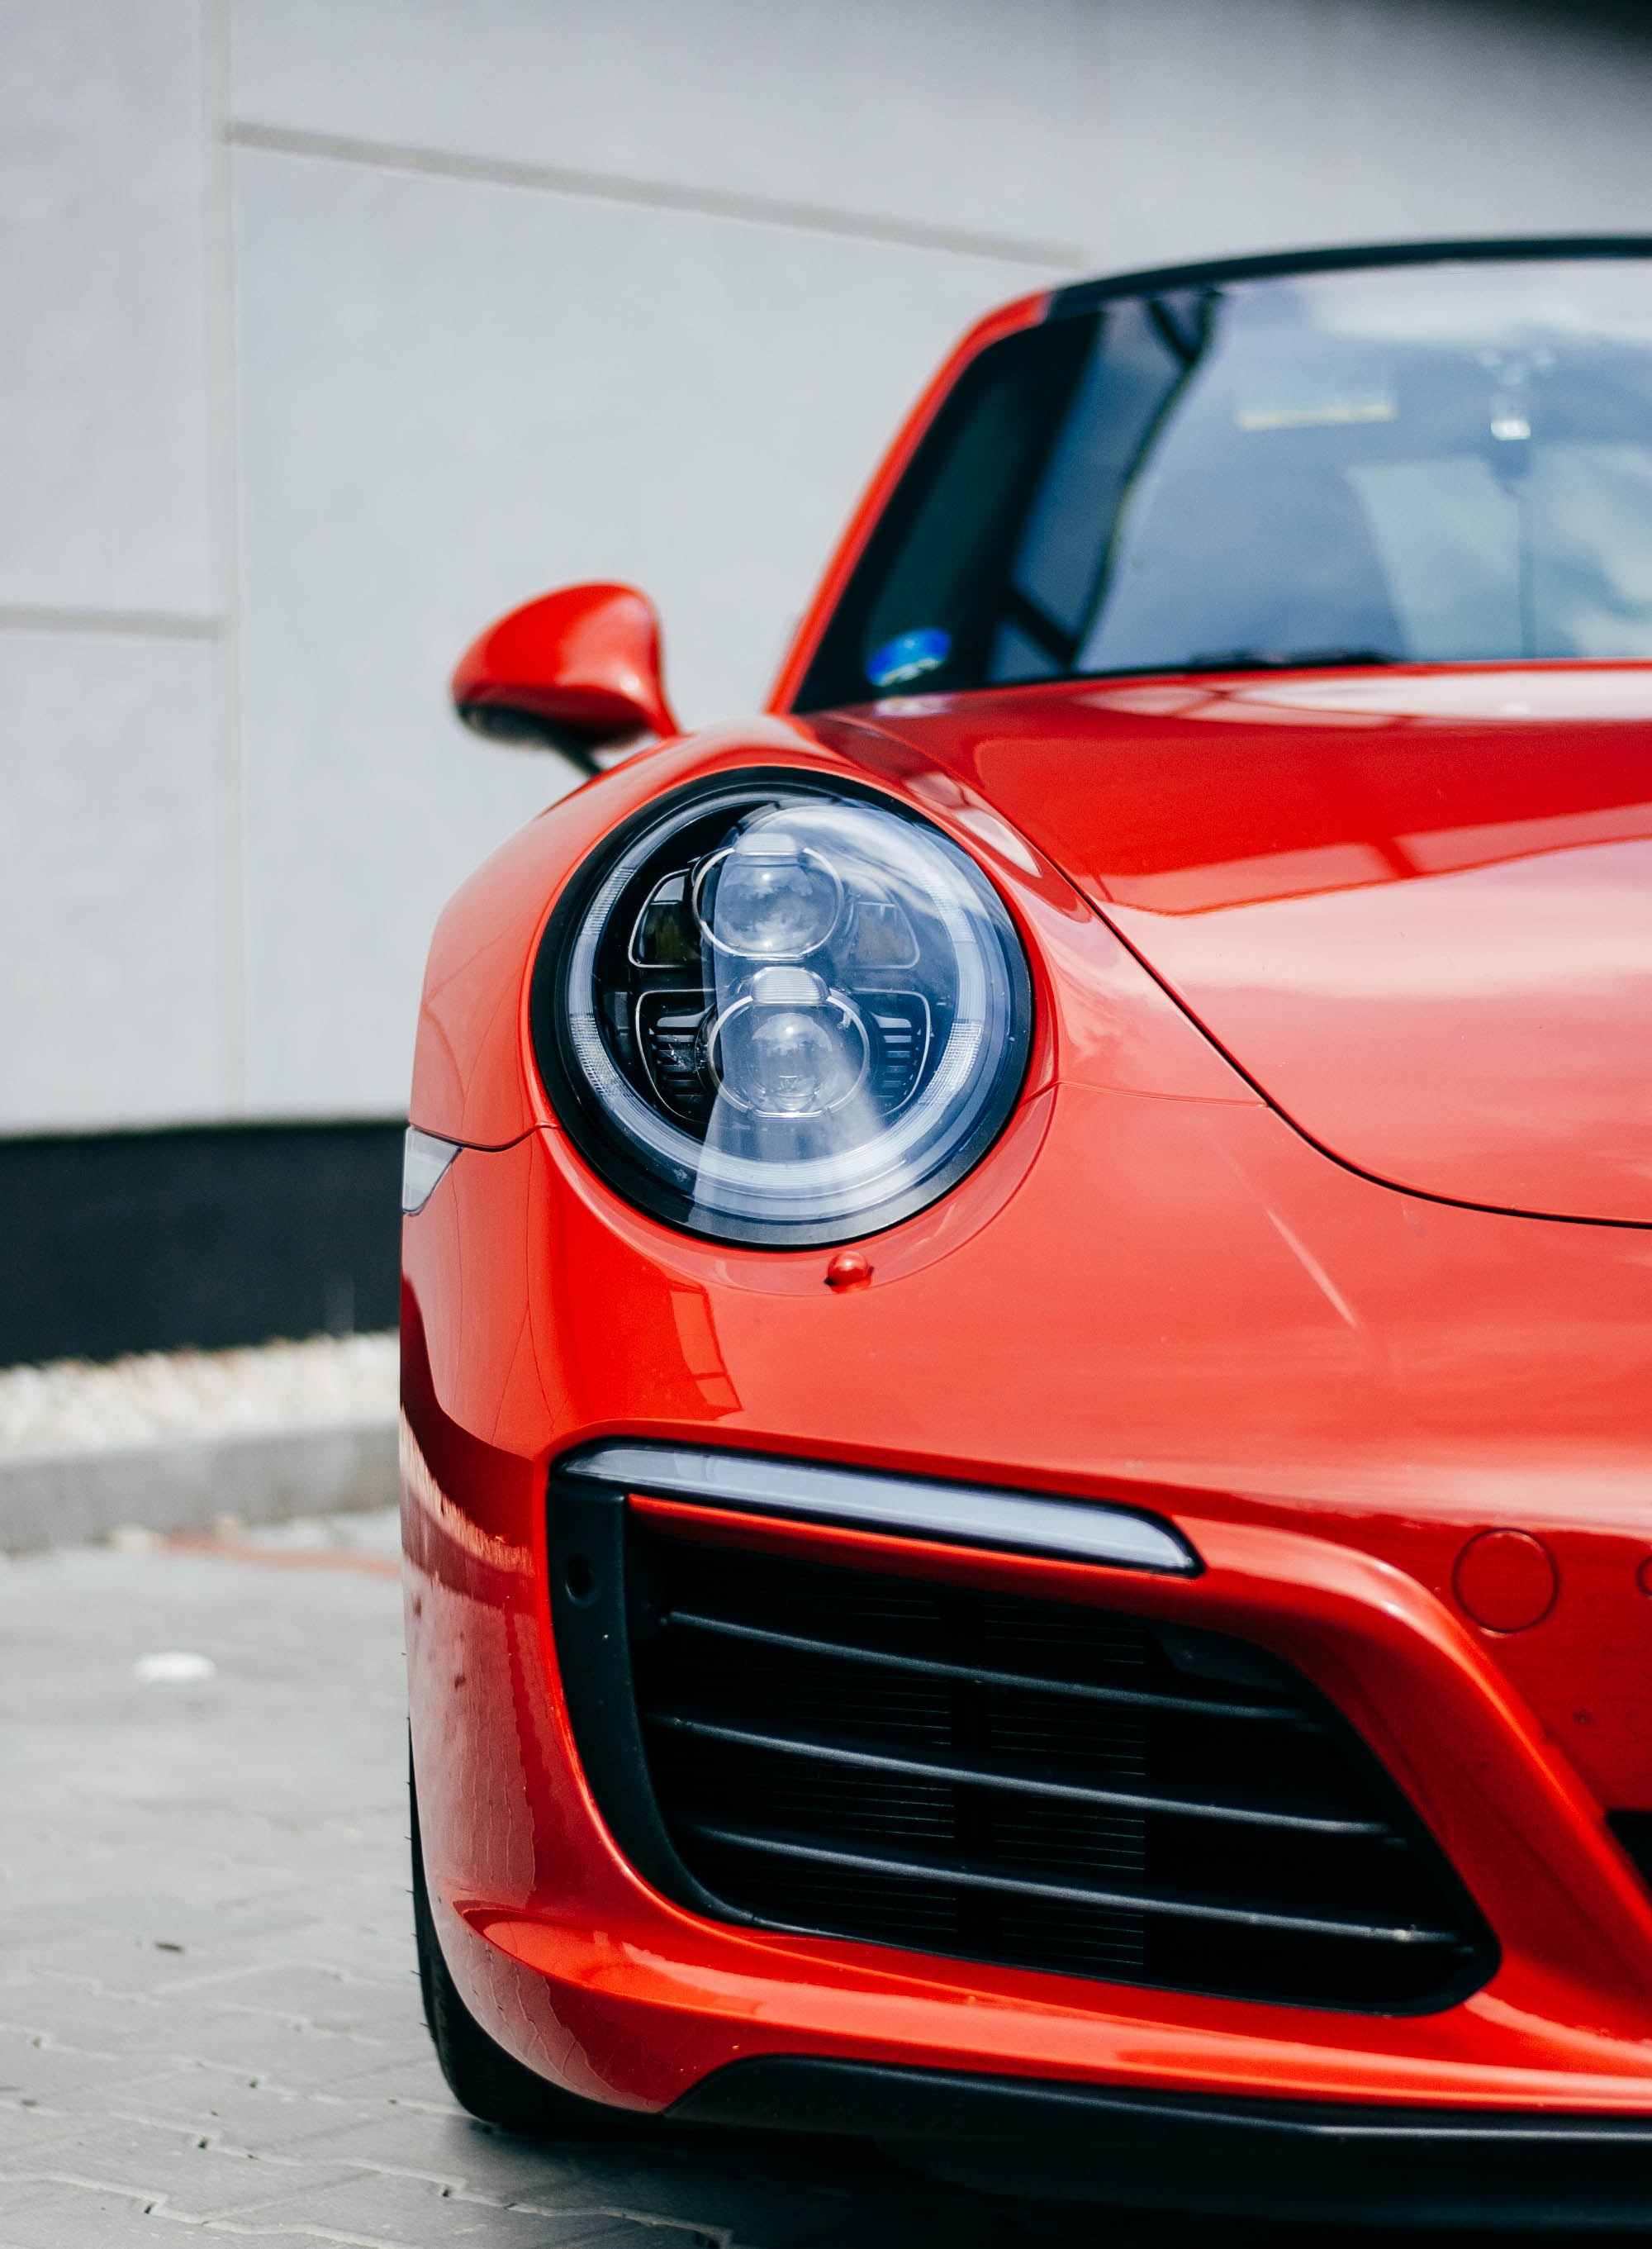 front view, headlight, cars, red, car, close up, machine Full HD